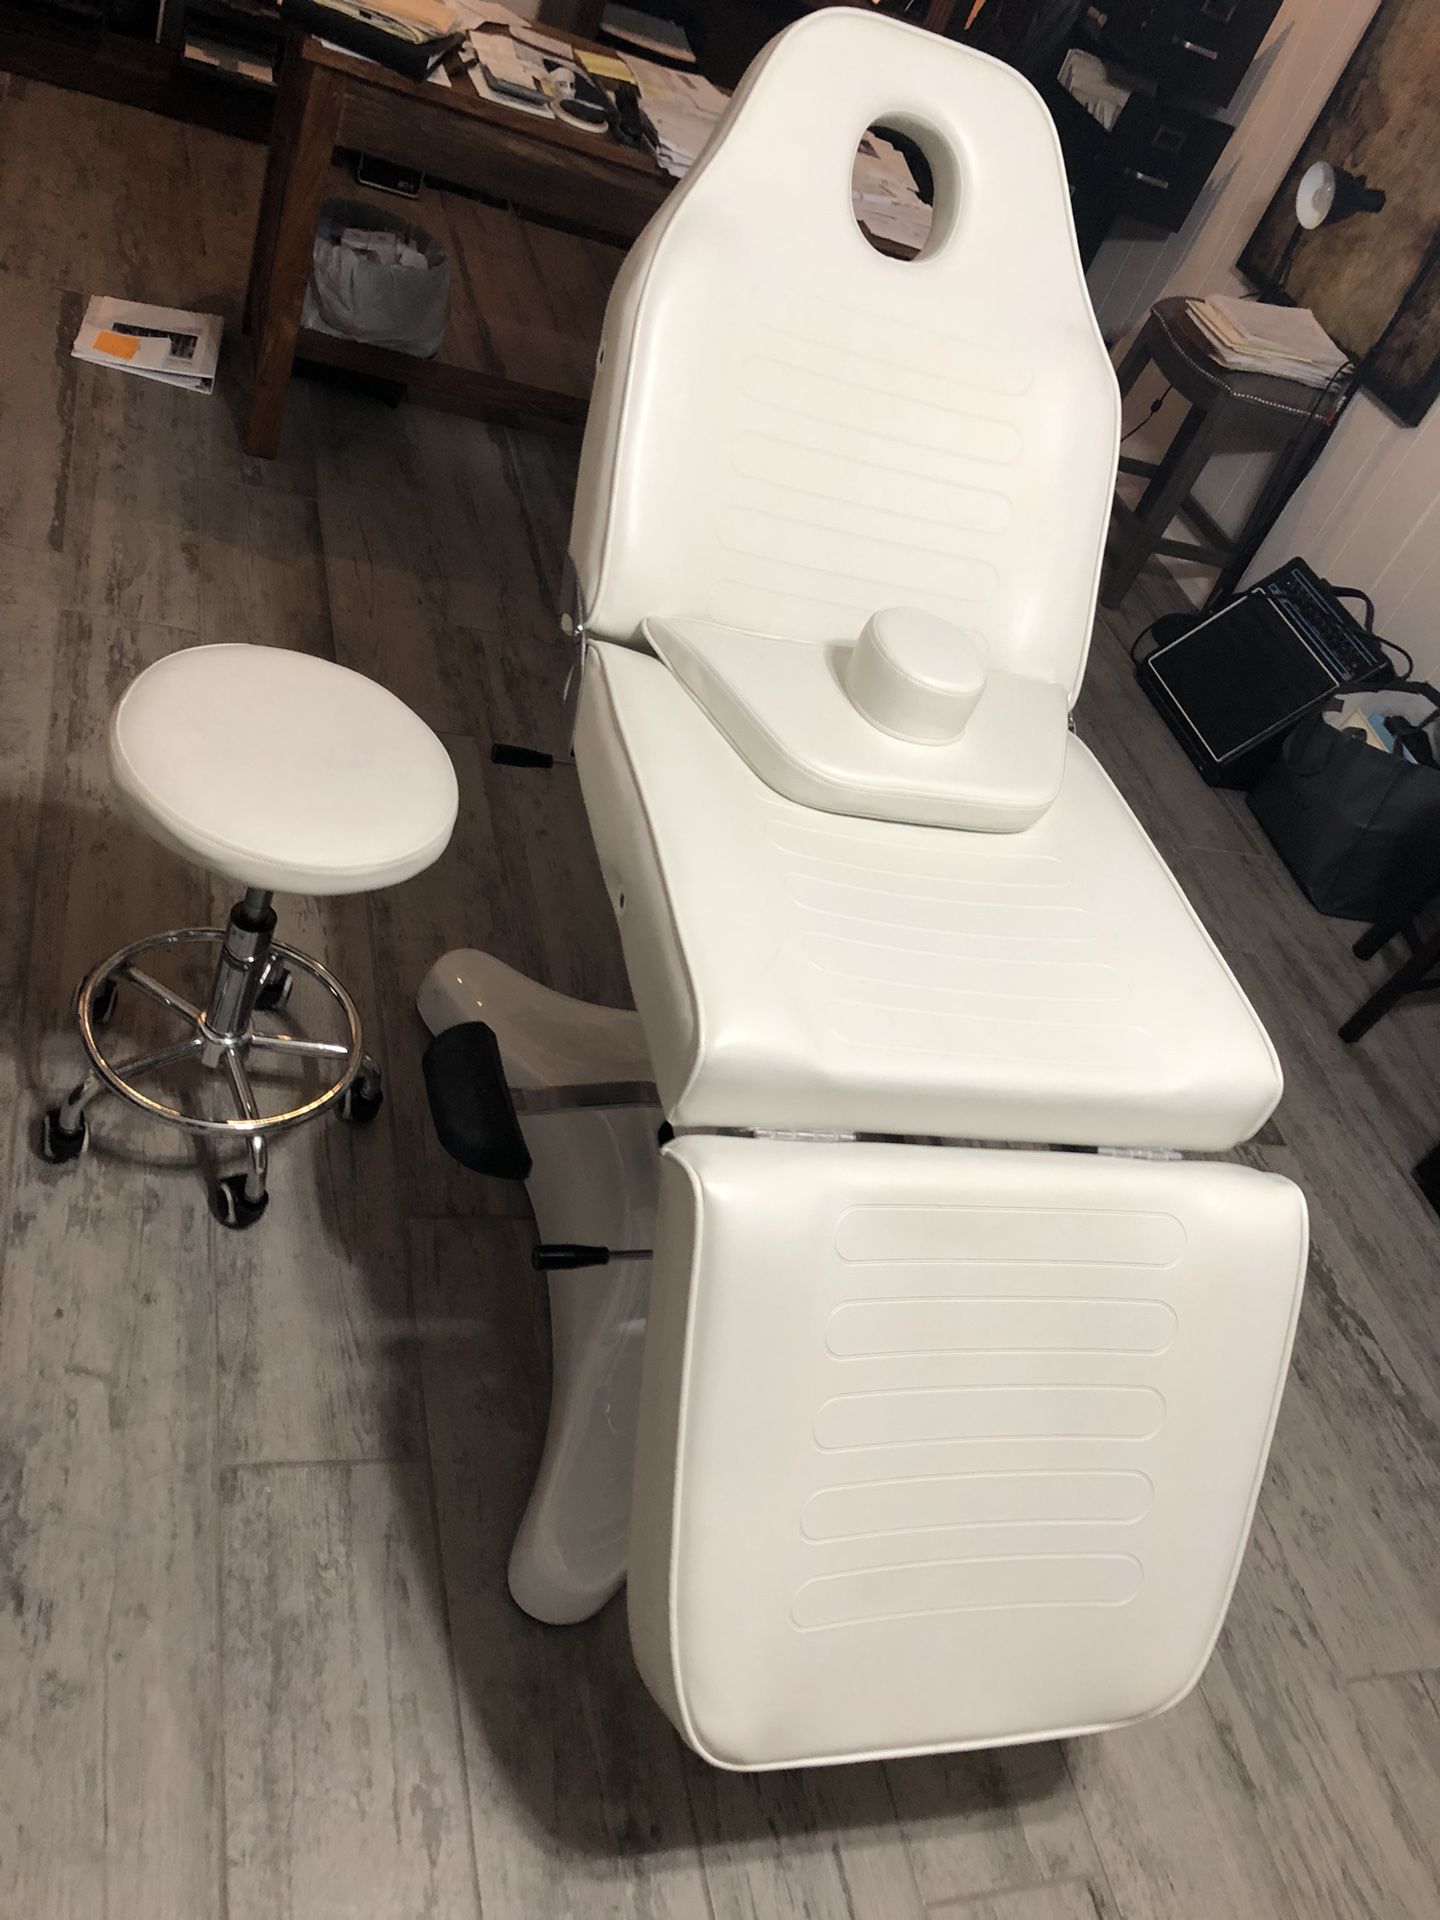 Makeup and massage chair with side roller chair